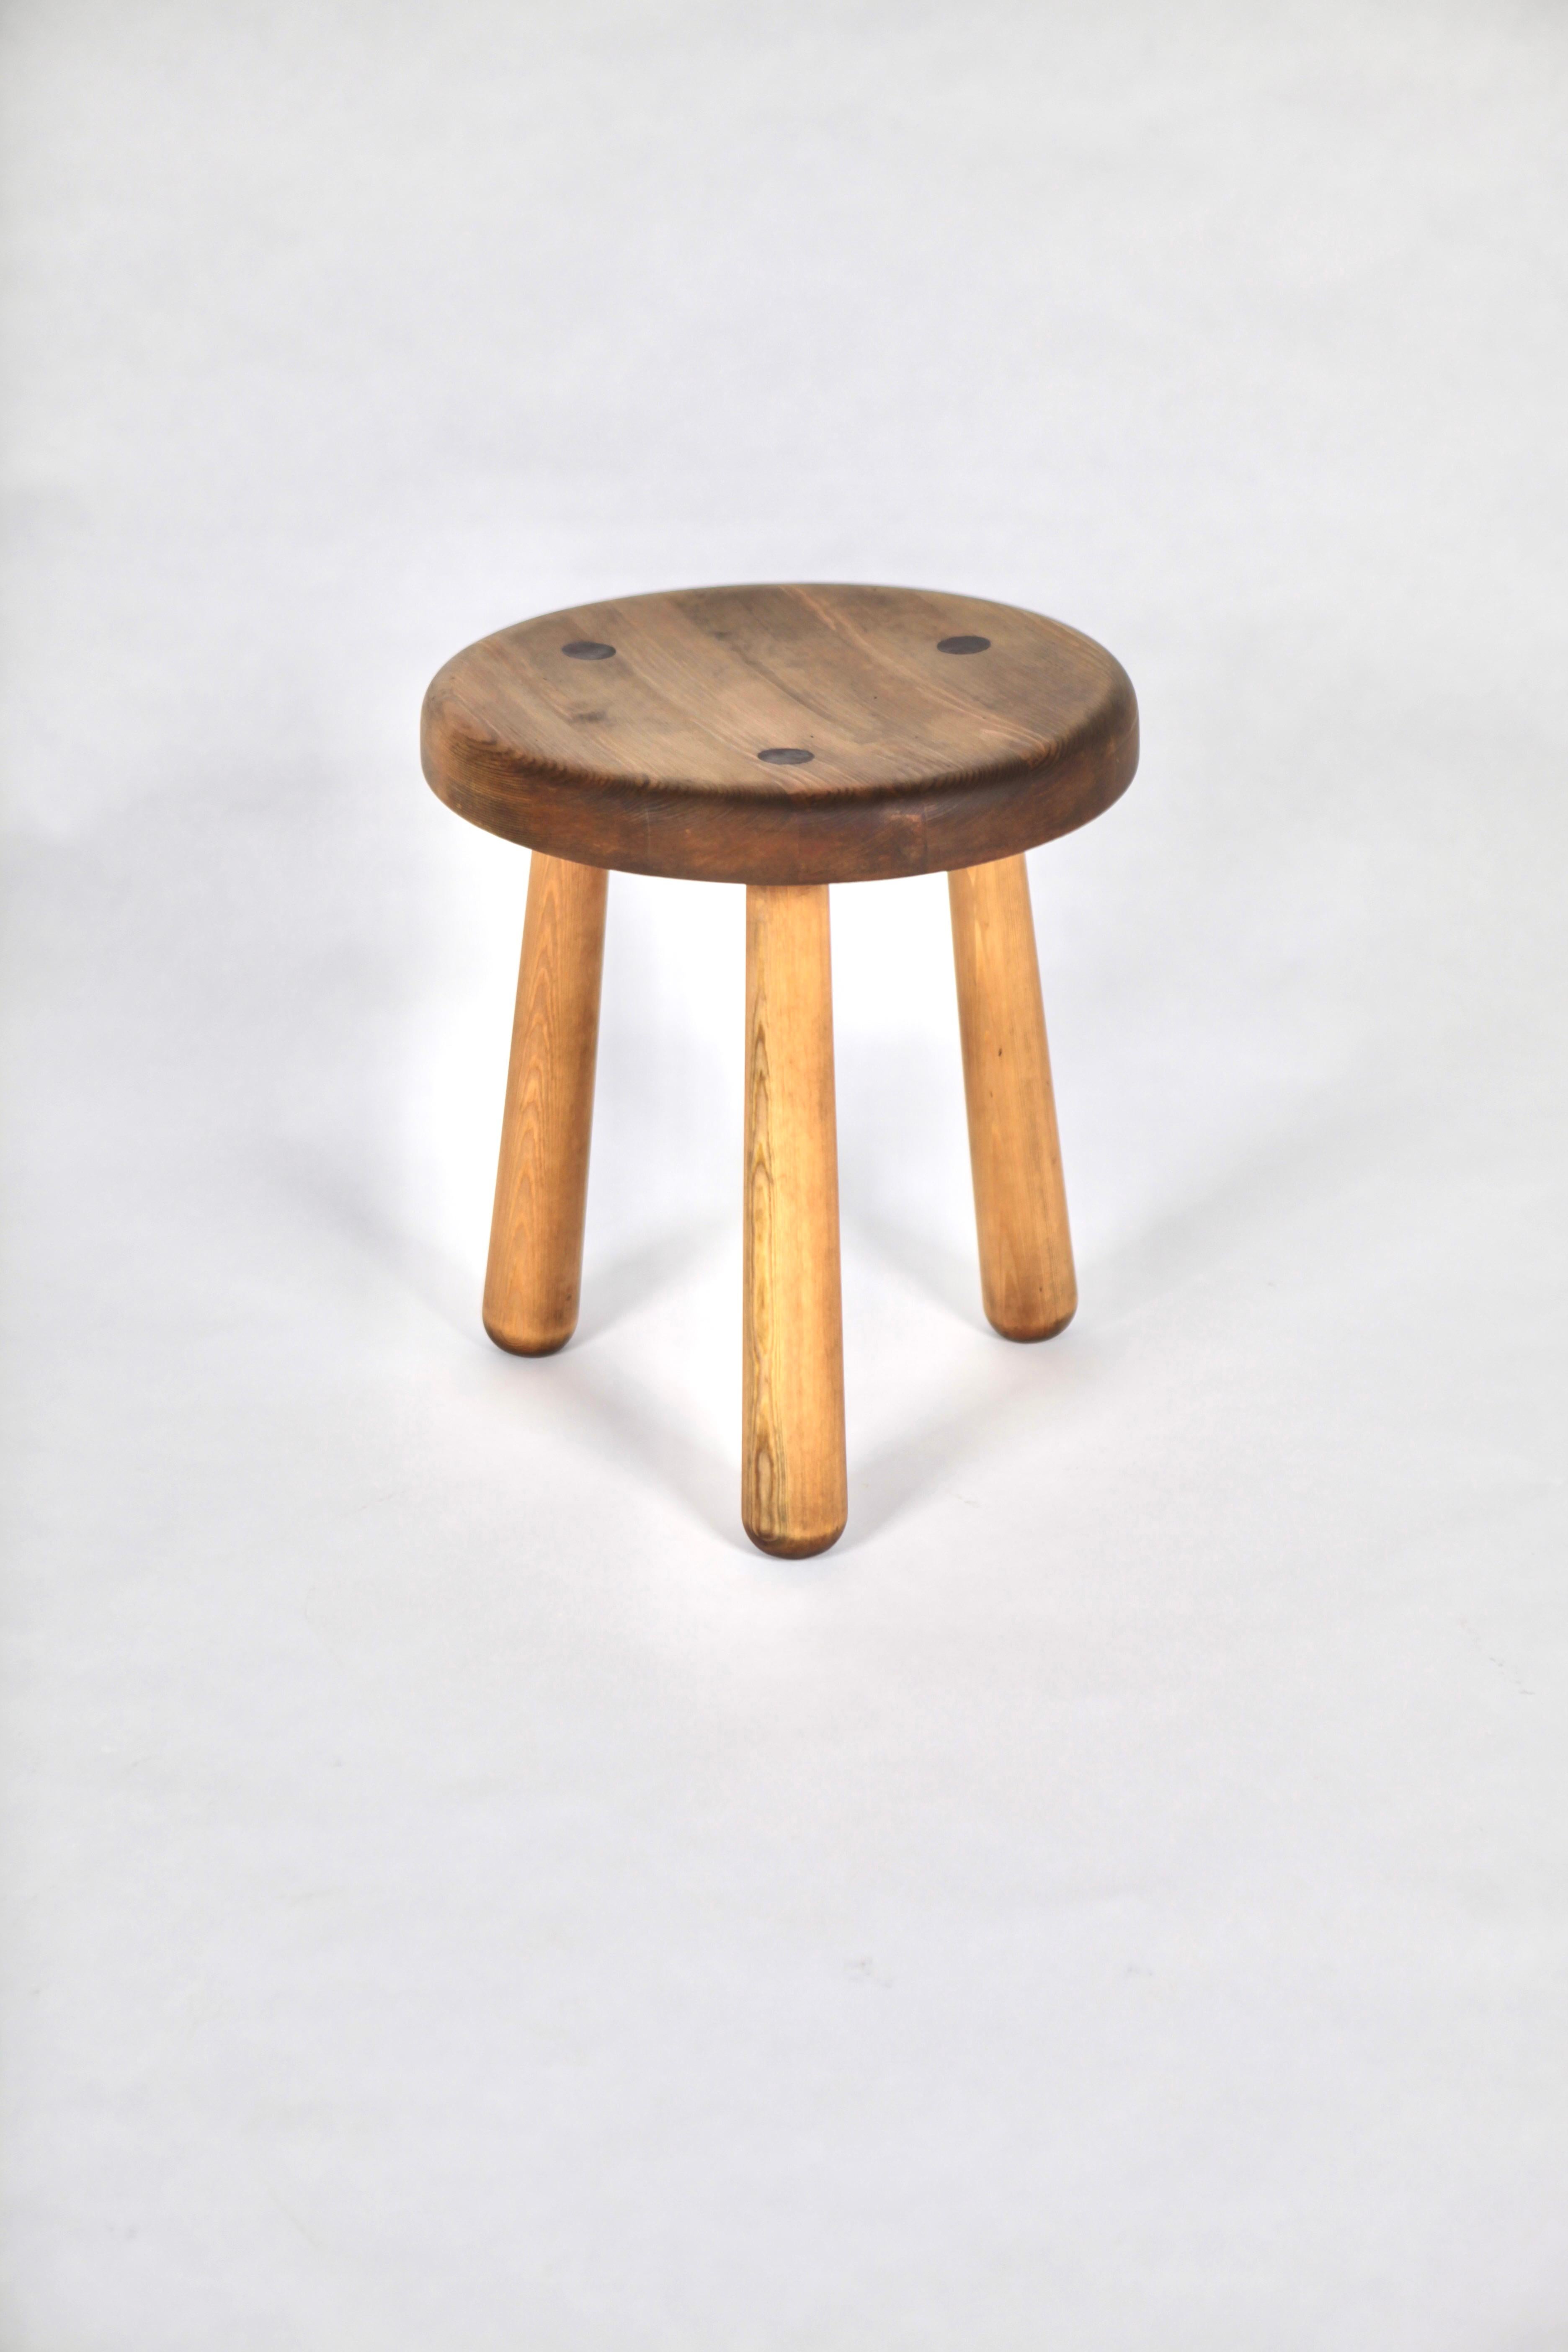 Axel Einar Hjorth, stool, model 'Utö'. 
Solid acid stained Nordic pine.
Executed by Nordiska Kompaniet in Sweden. Designed in 1932.
Iconic design from the 'sports cabin' series named after the Stockholm archipelago region.

